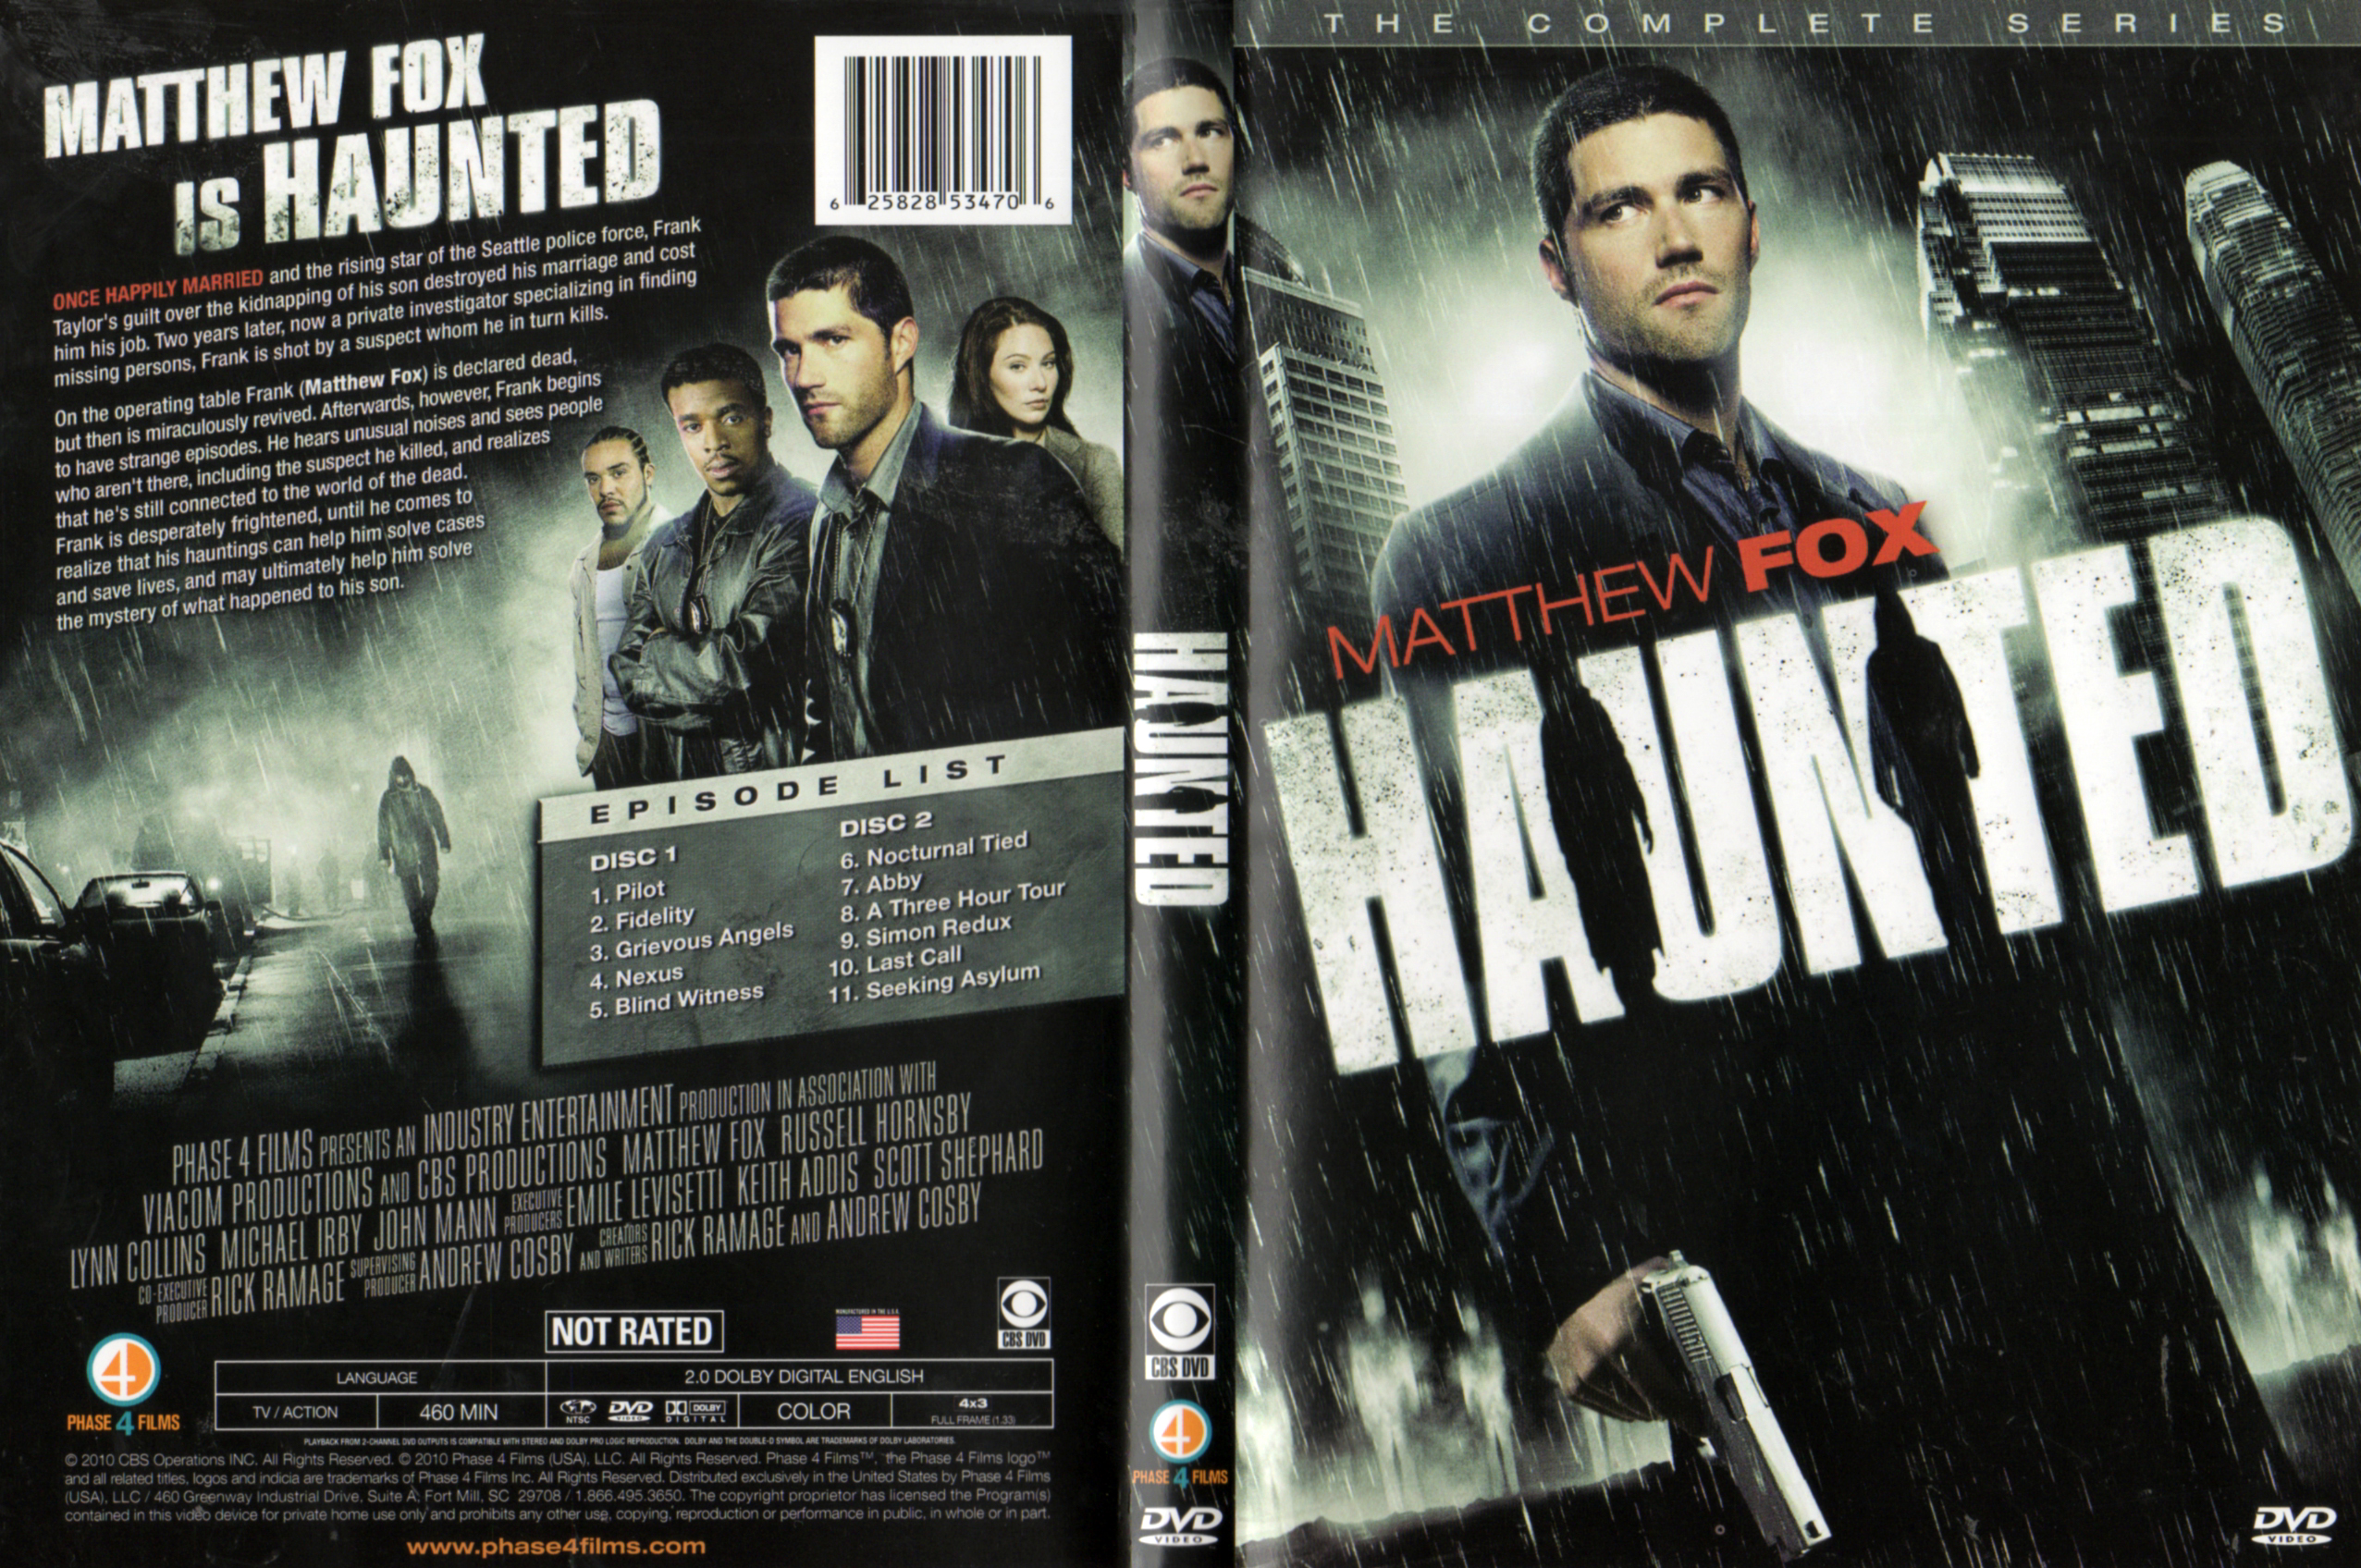 Jaquette DVD Haunted (Srie tv) Zone 1